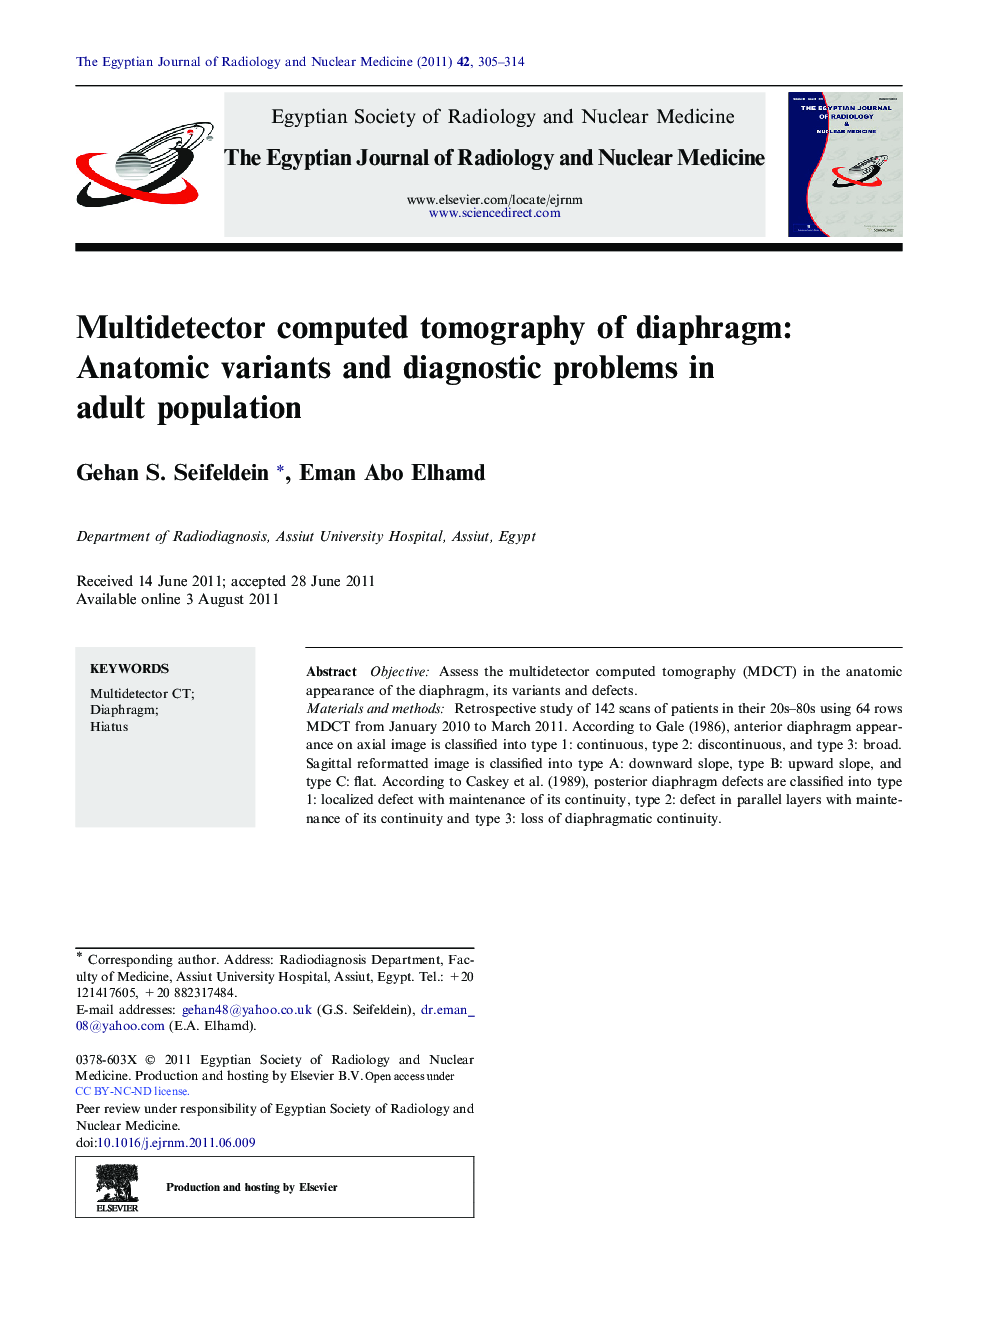 Multidetector computed tomography of diaphragm: Anatomic variants and diagnostic problems in adult population 